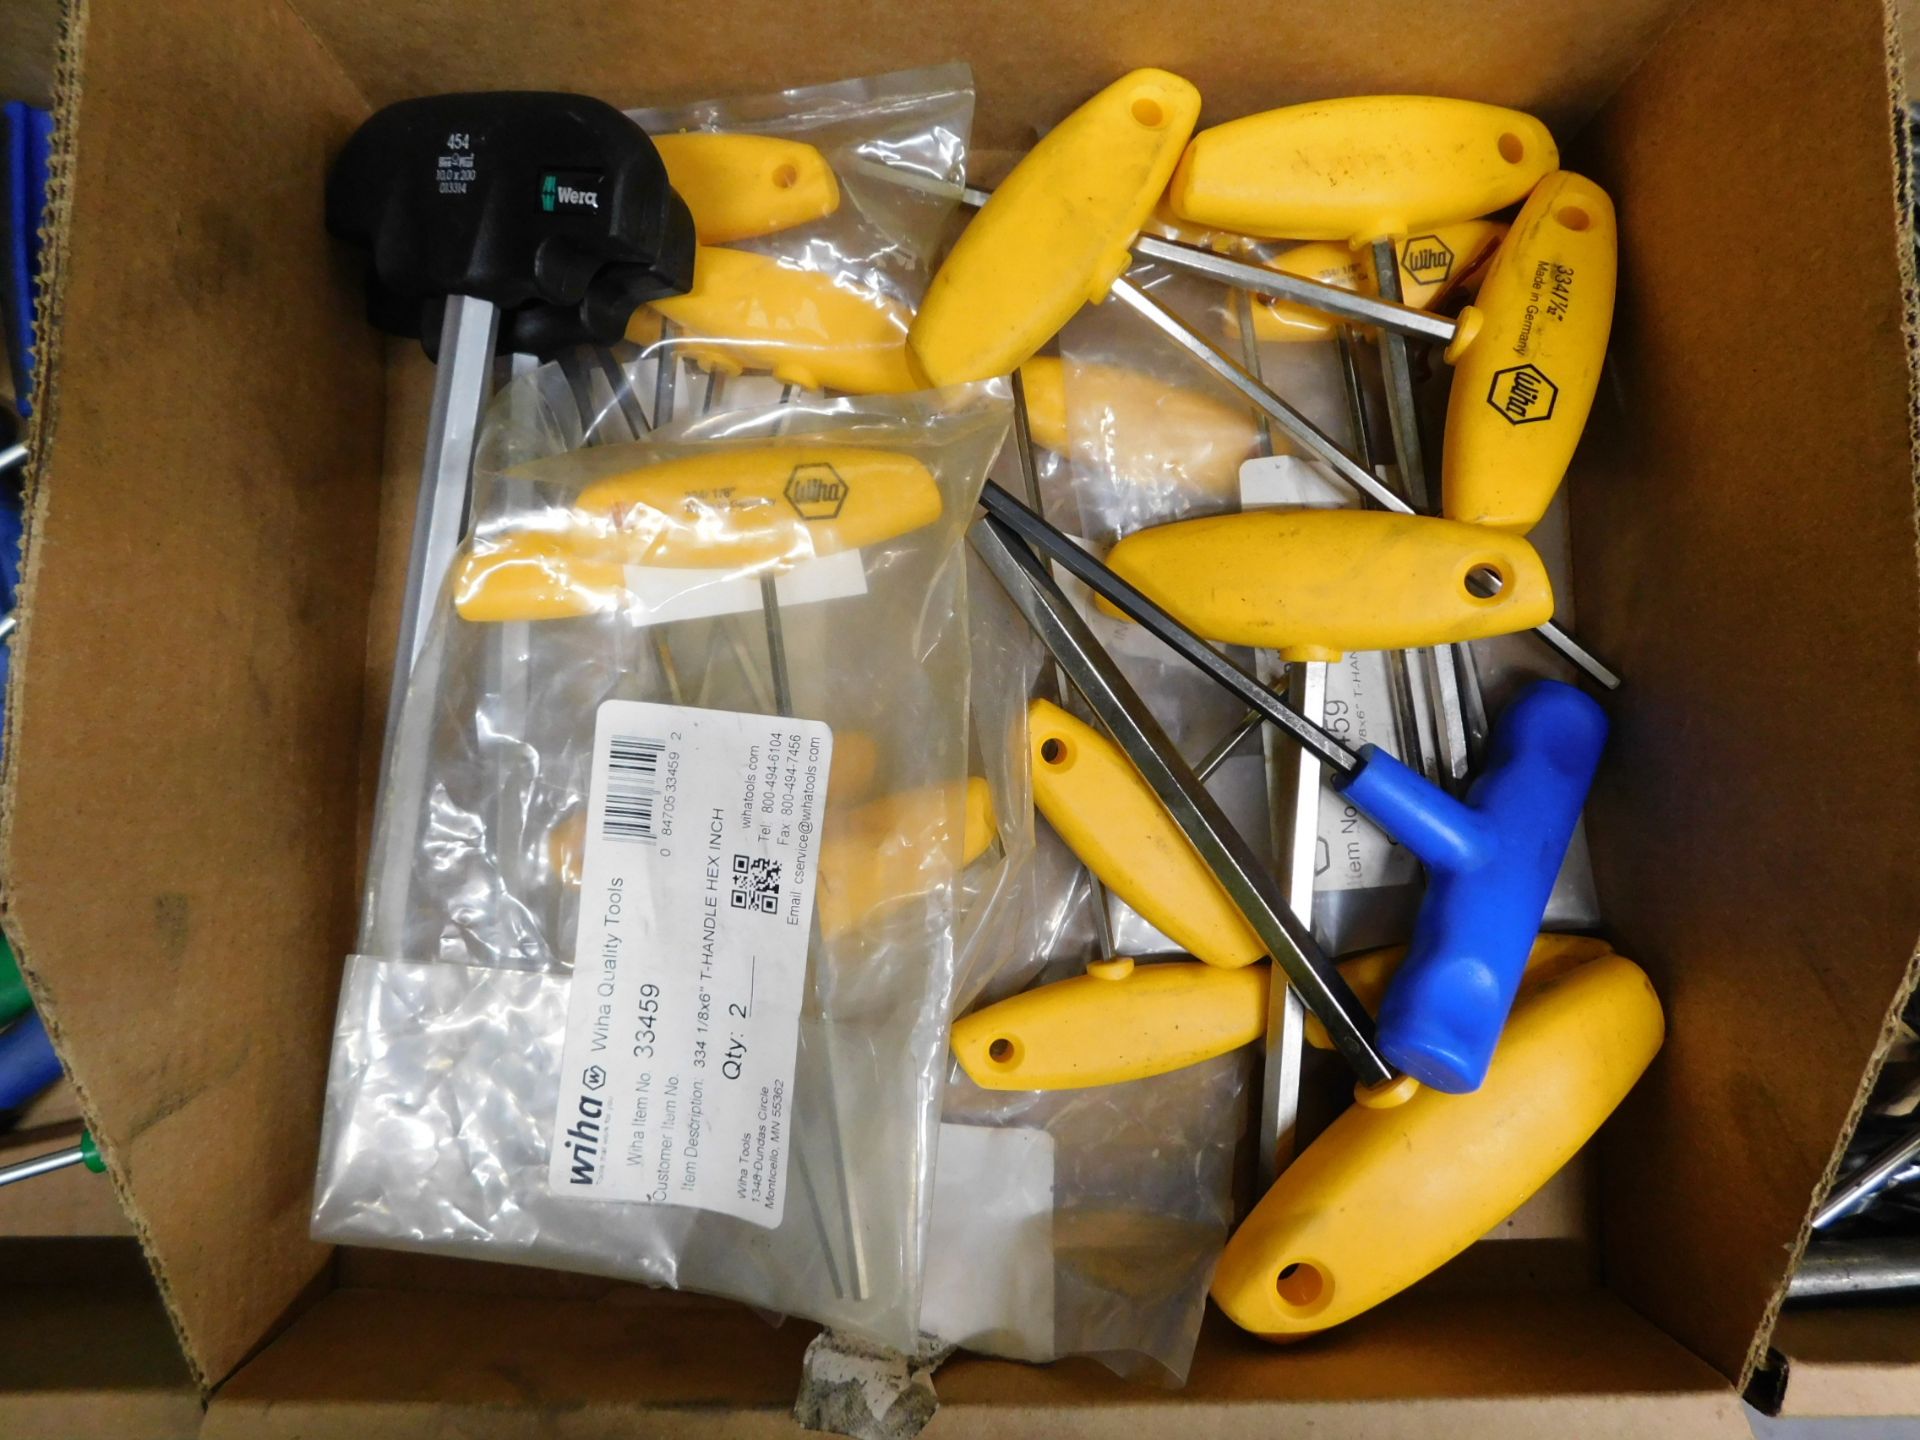 T-Handle Hex Wrenches